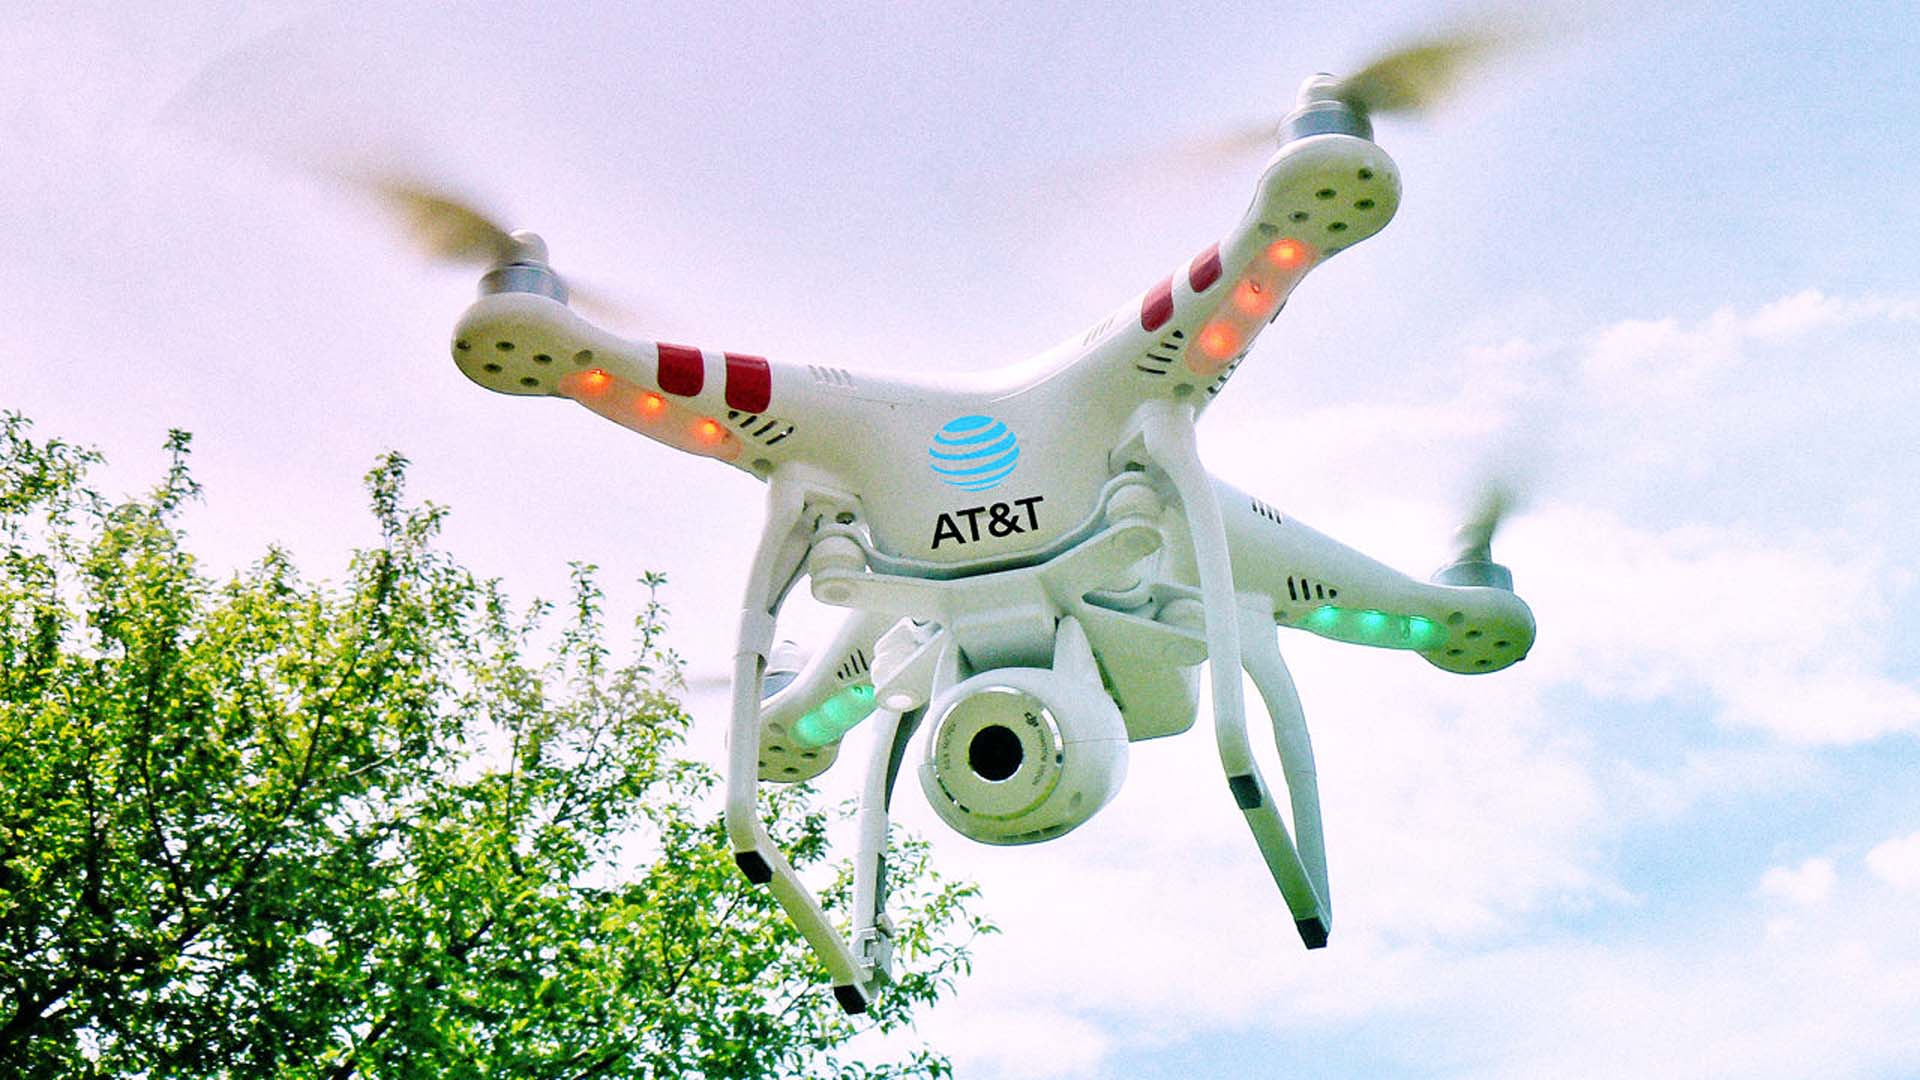 Alinaza entre AT&T y Qualcomm Technologies busca sacar provecho a Drones